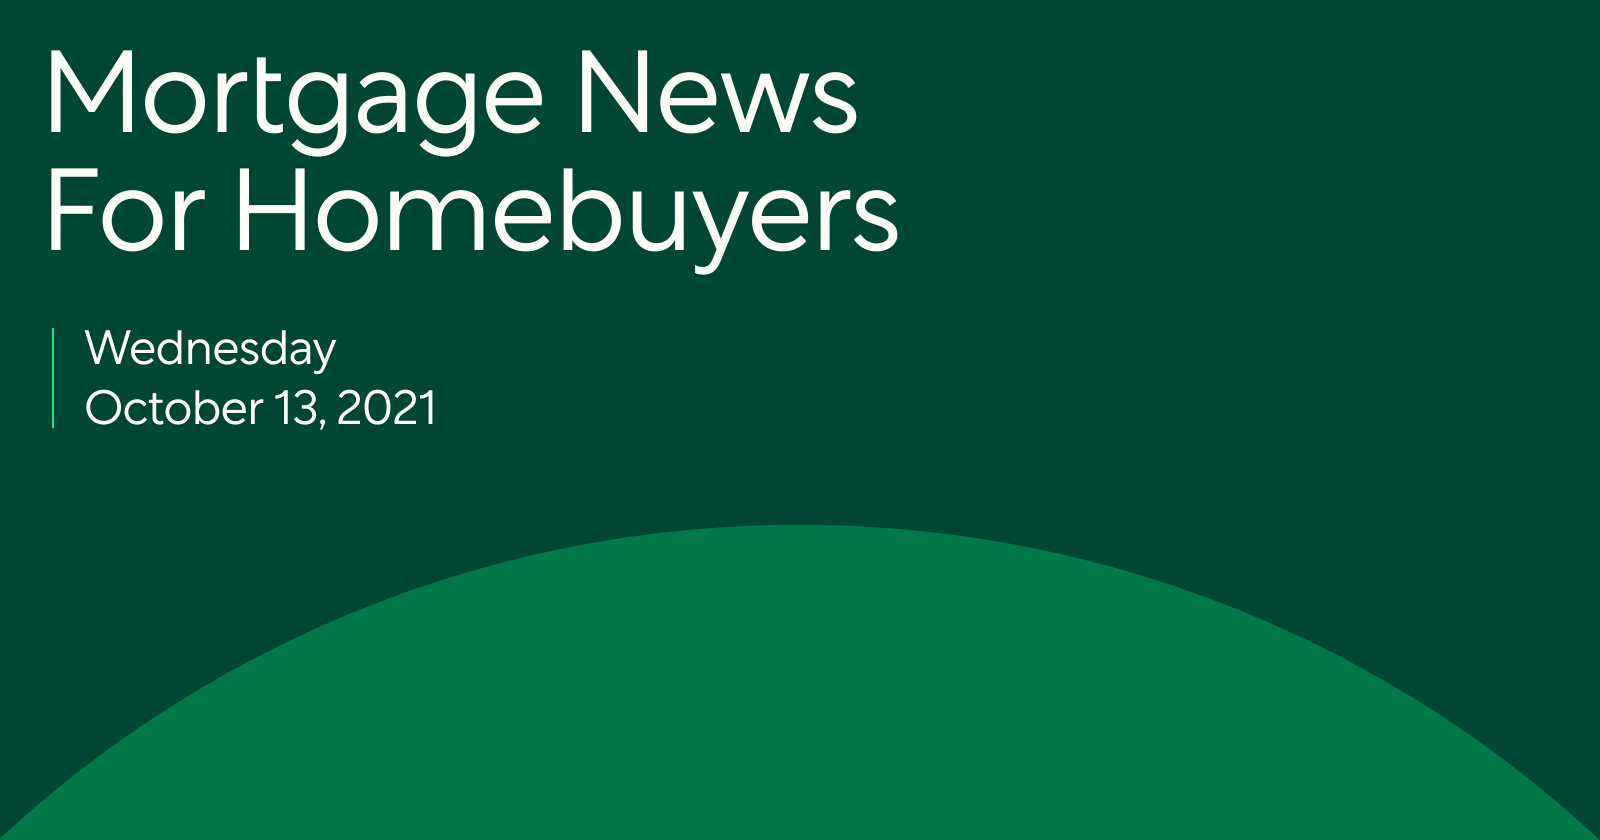 Mortgage News: Conforming Loan Limits Are Going Up